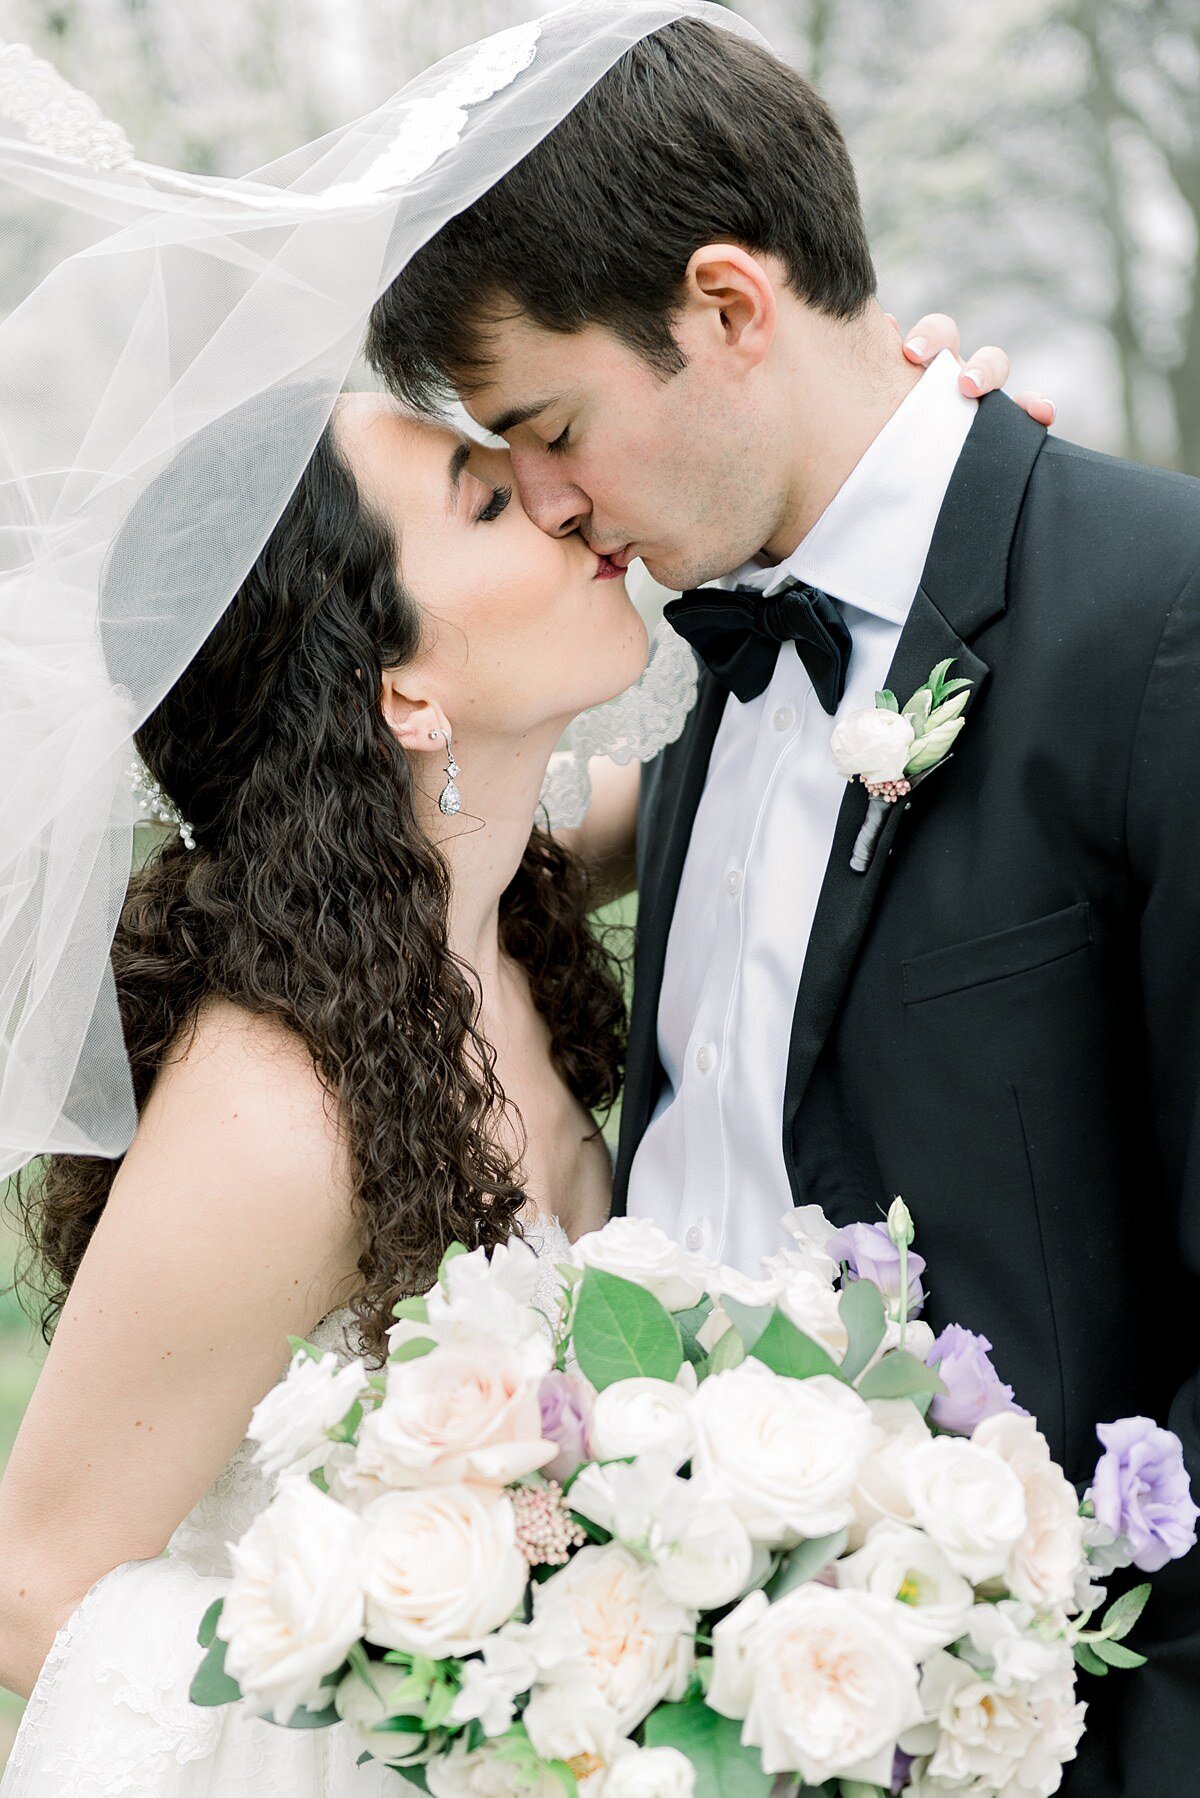 Bride and groom kissing underneath the bride's veil while bride holds large bouquet of white and purple flowers